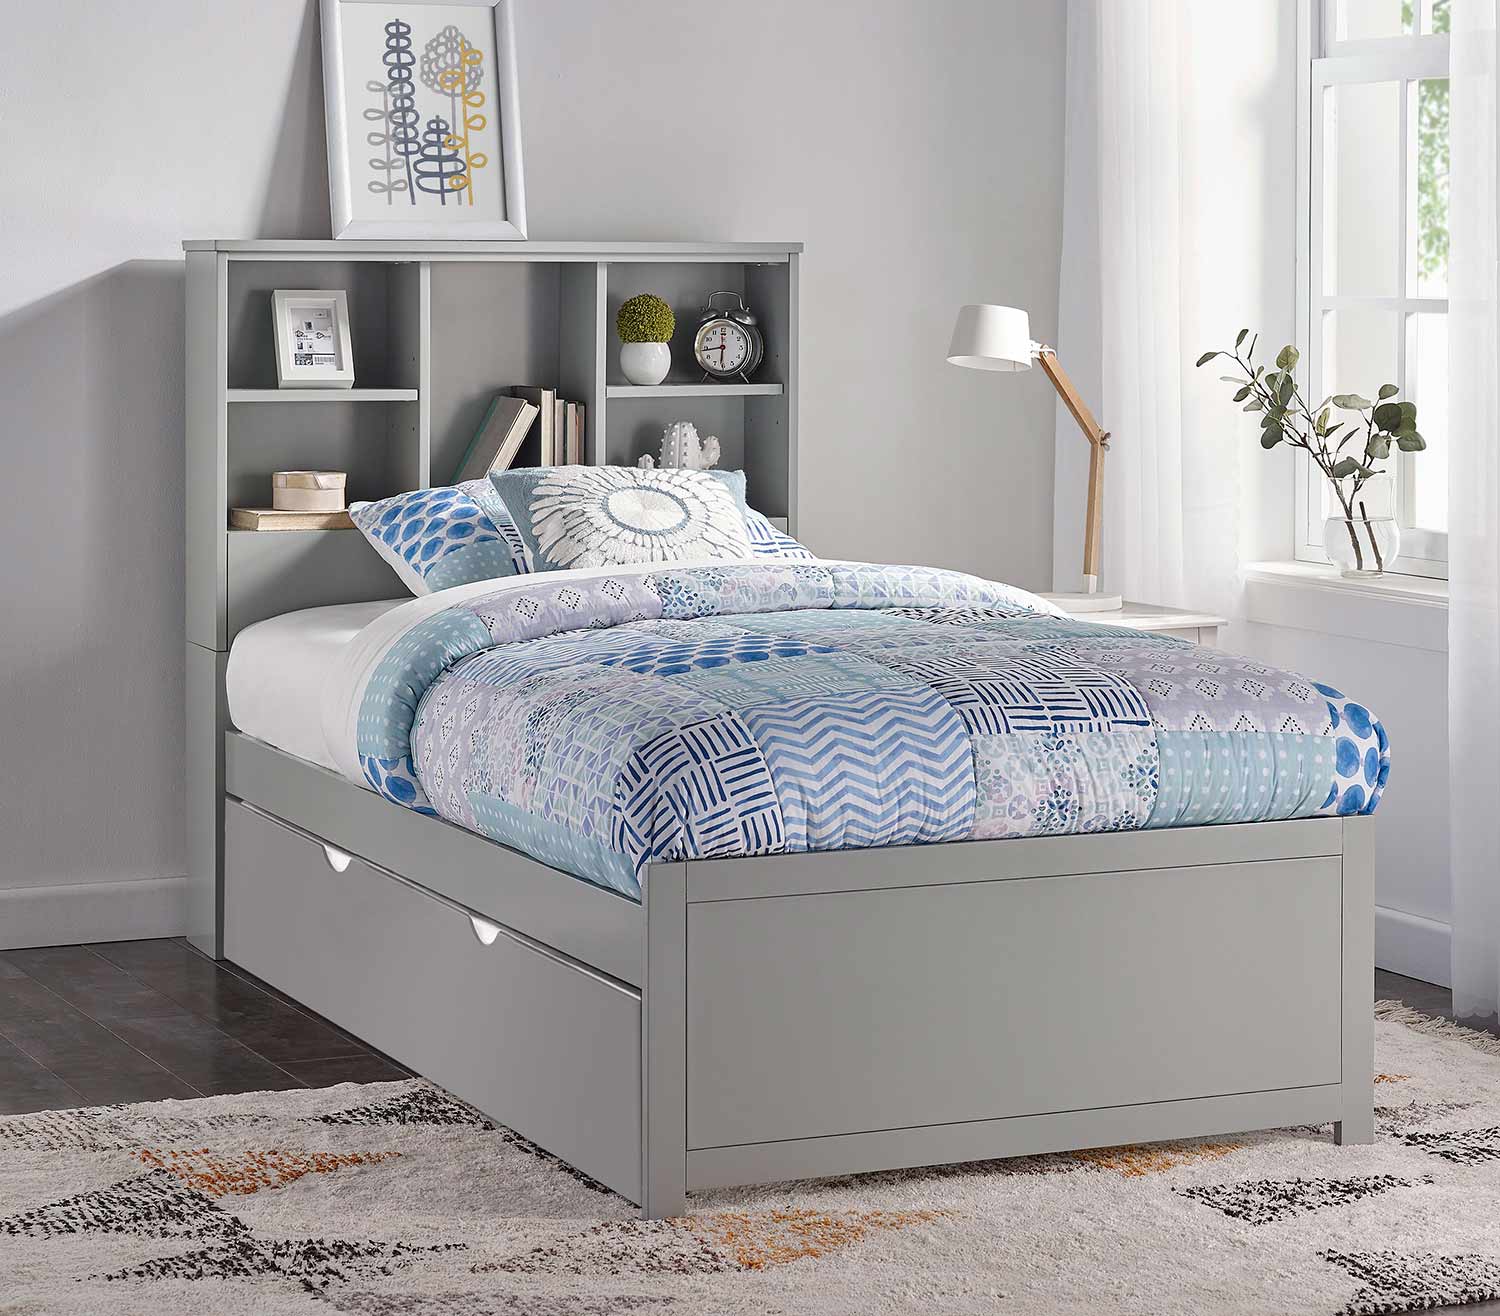 Hillsdale Caspian Twin Bookcase Bed with Trundle Unit - Gray